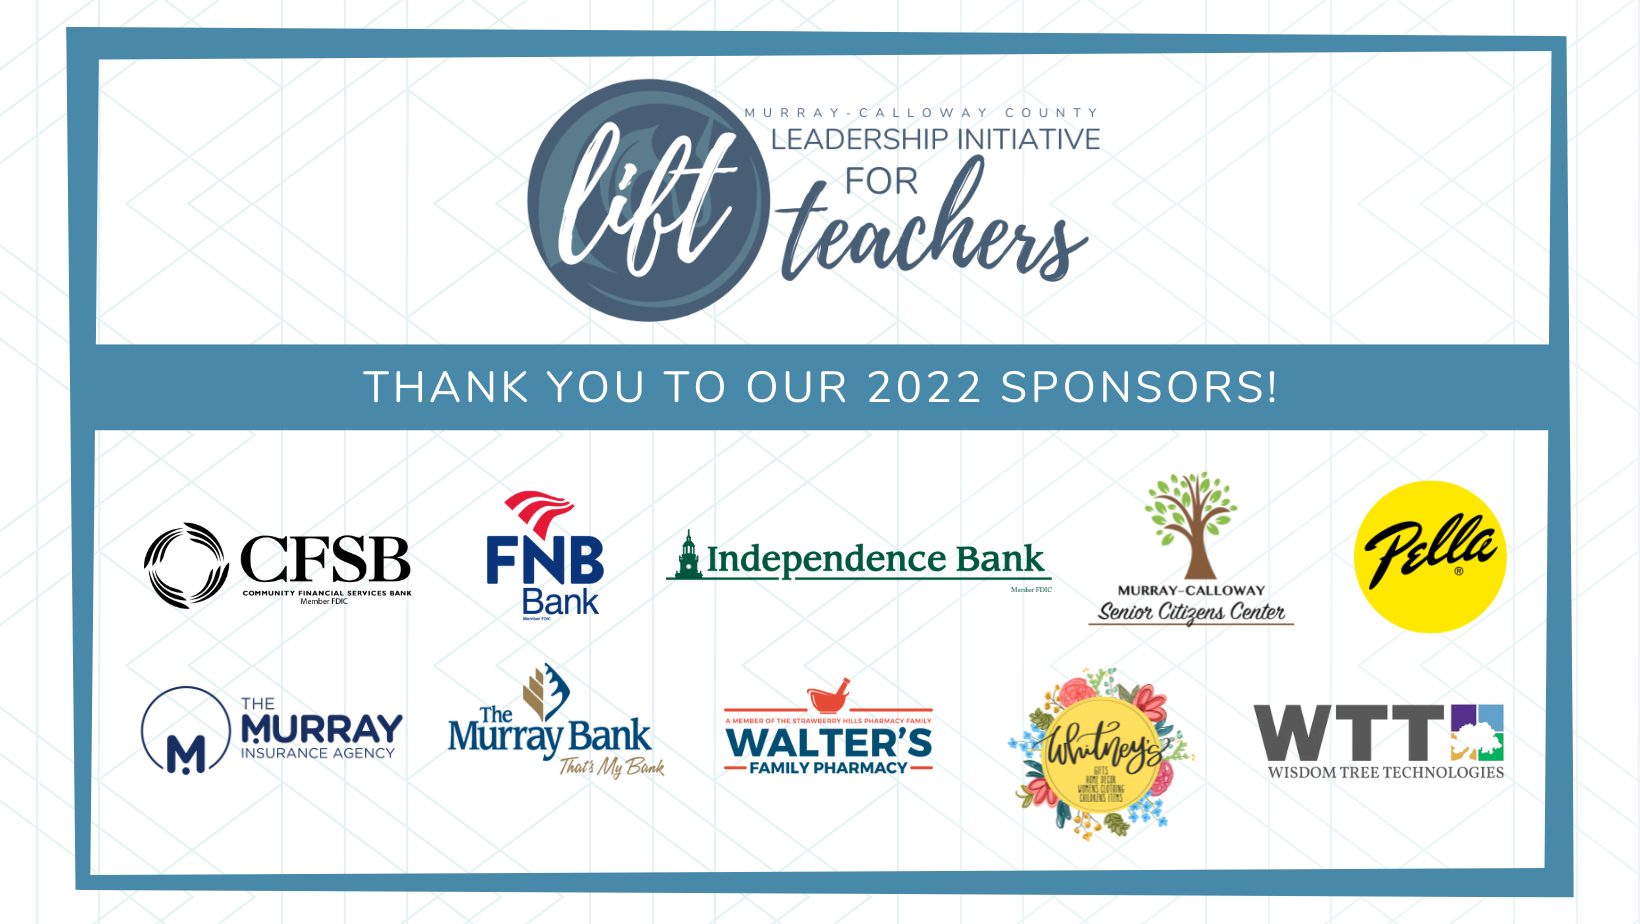 Thank You to our 2022 Sponsors!